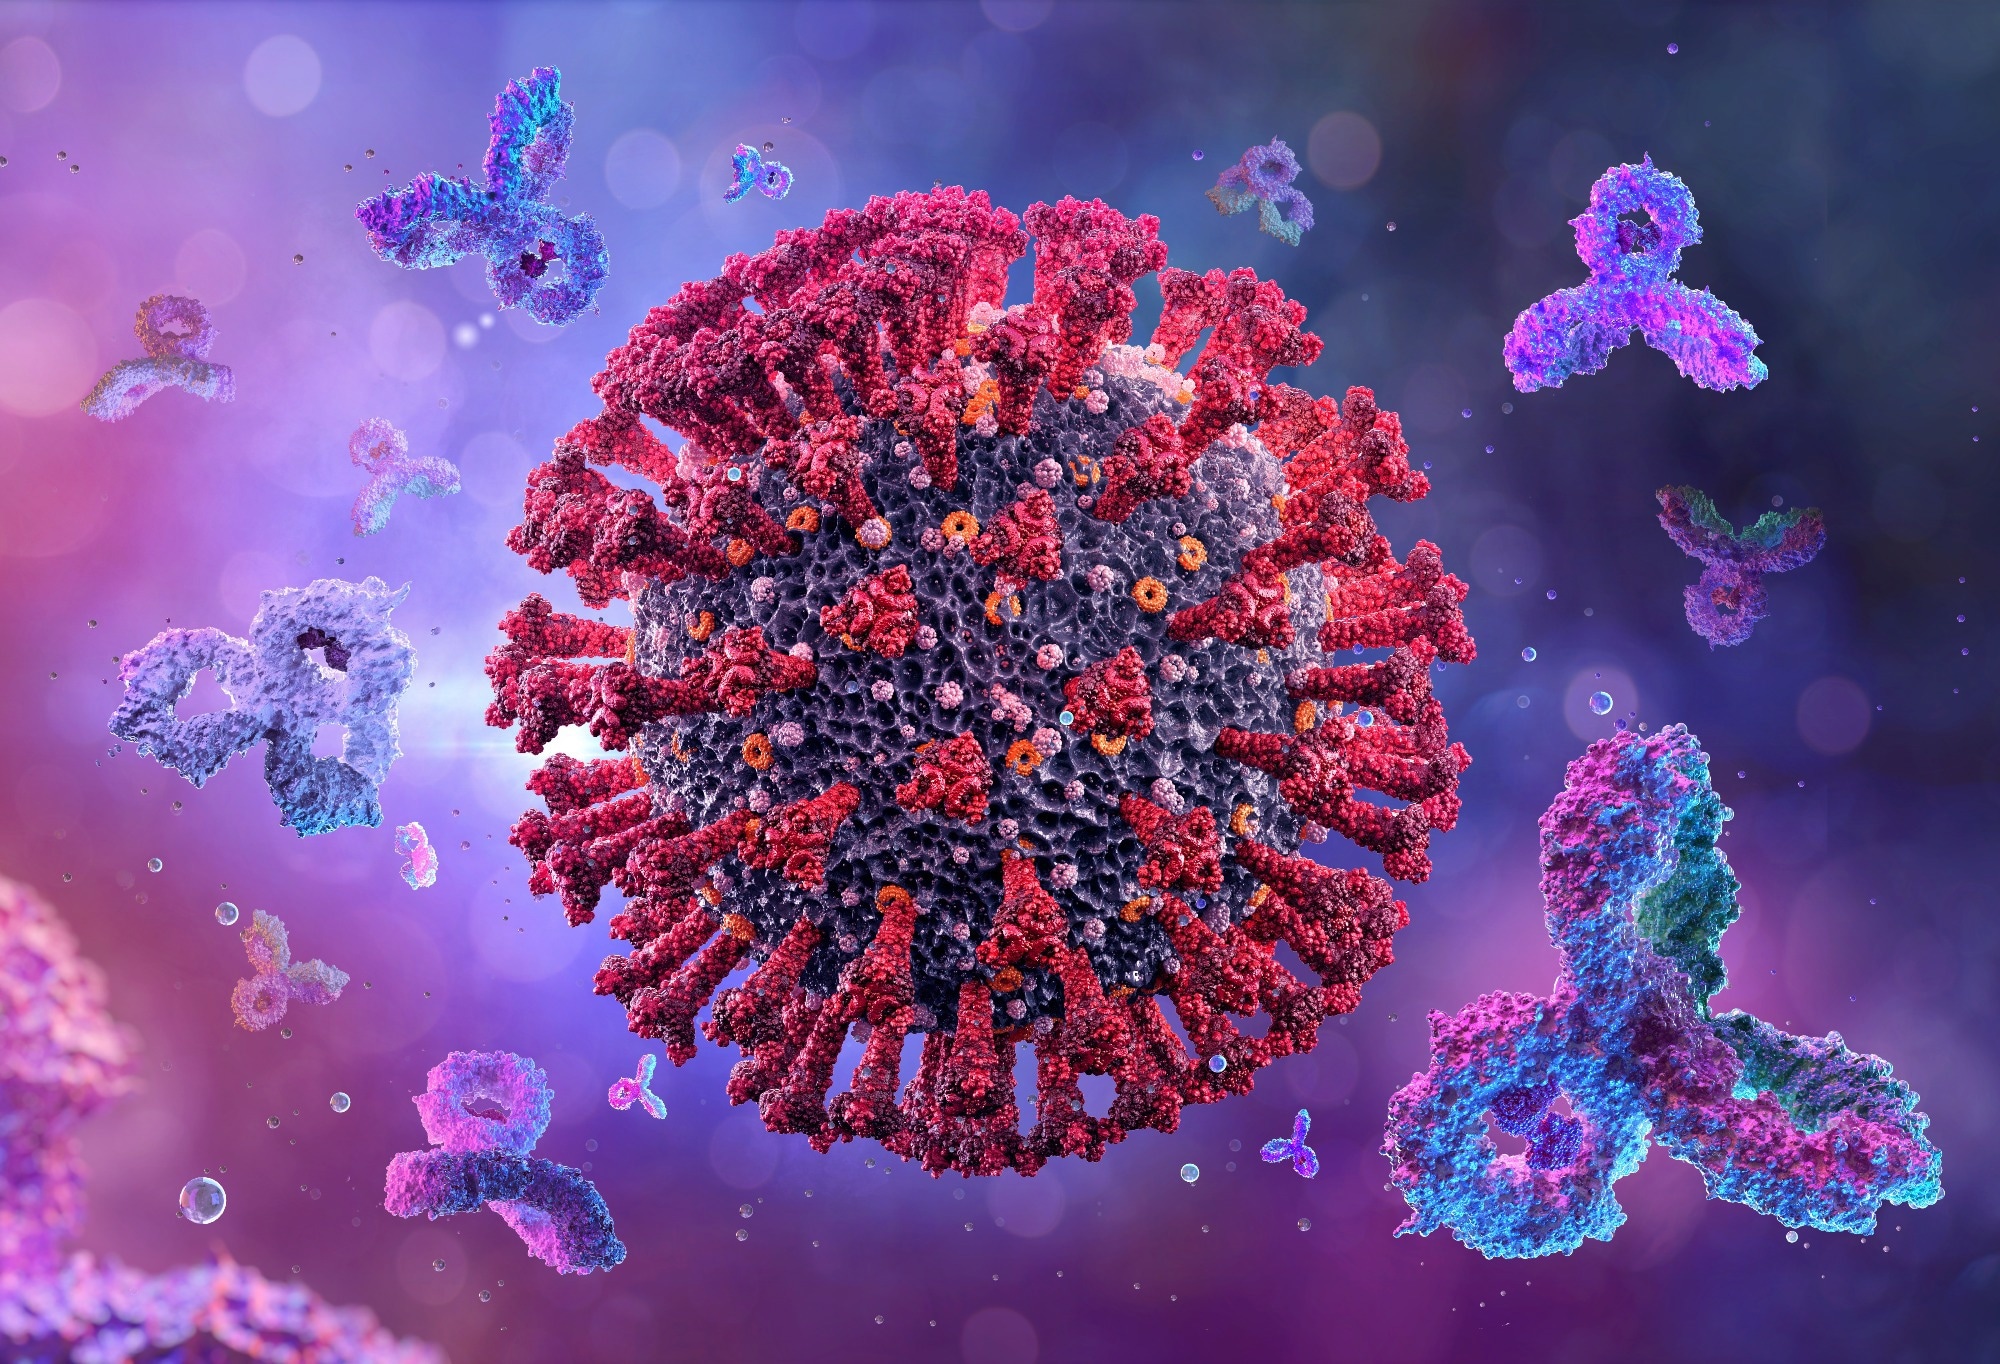 Study: Identification of broad, potent antibodies to functionally constrained regions of SARS-CoV-2 spike following a breakthrough infection. Image Credit: Corona Borealis Studio/Shutterstock